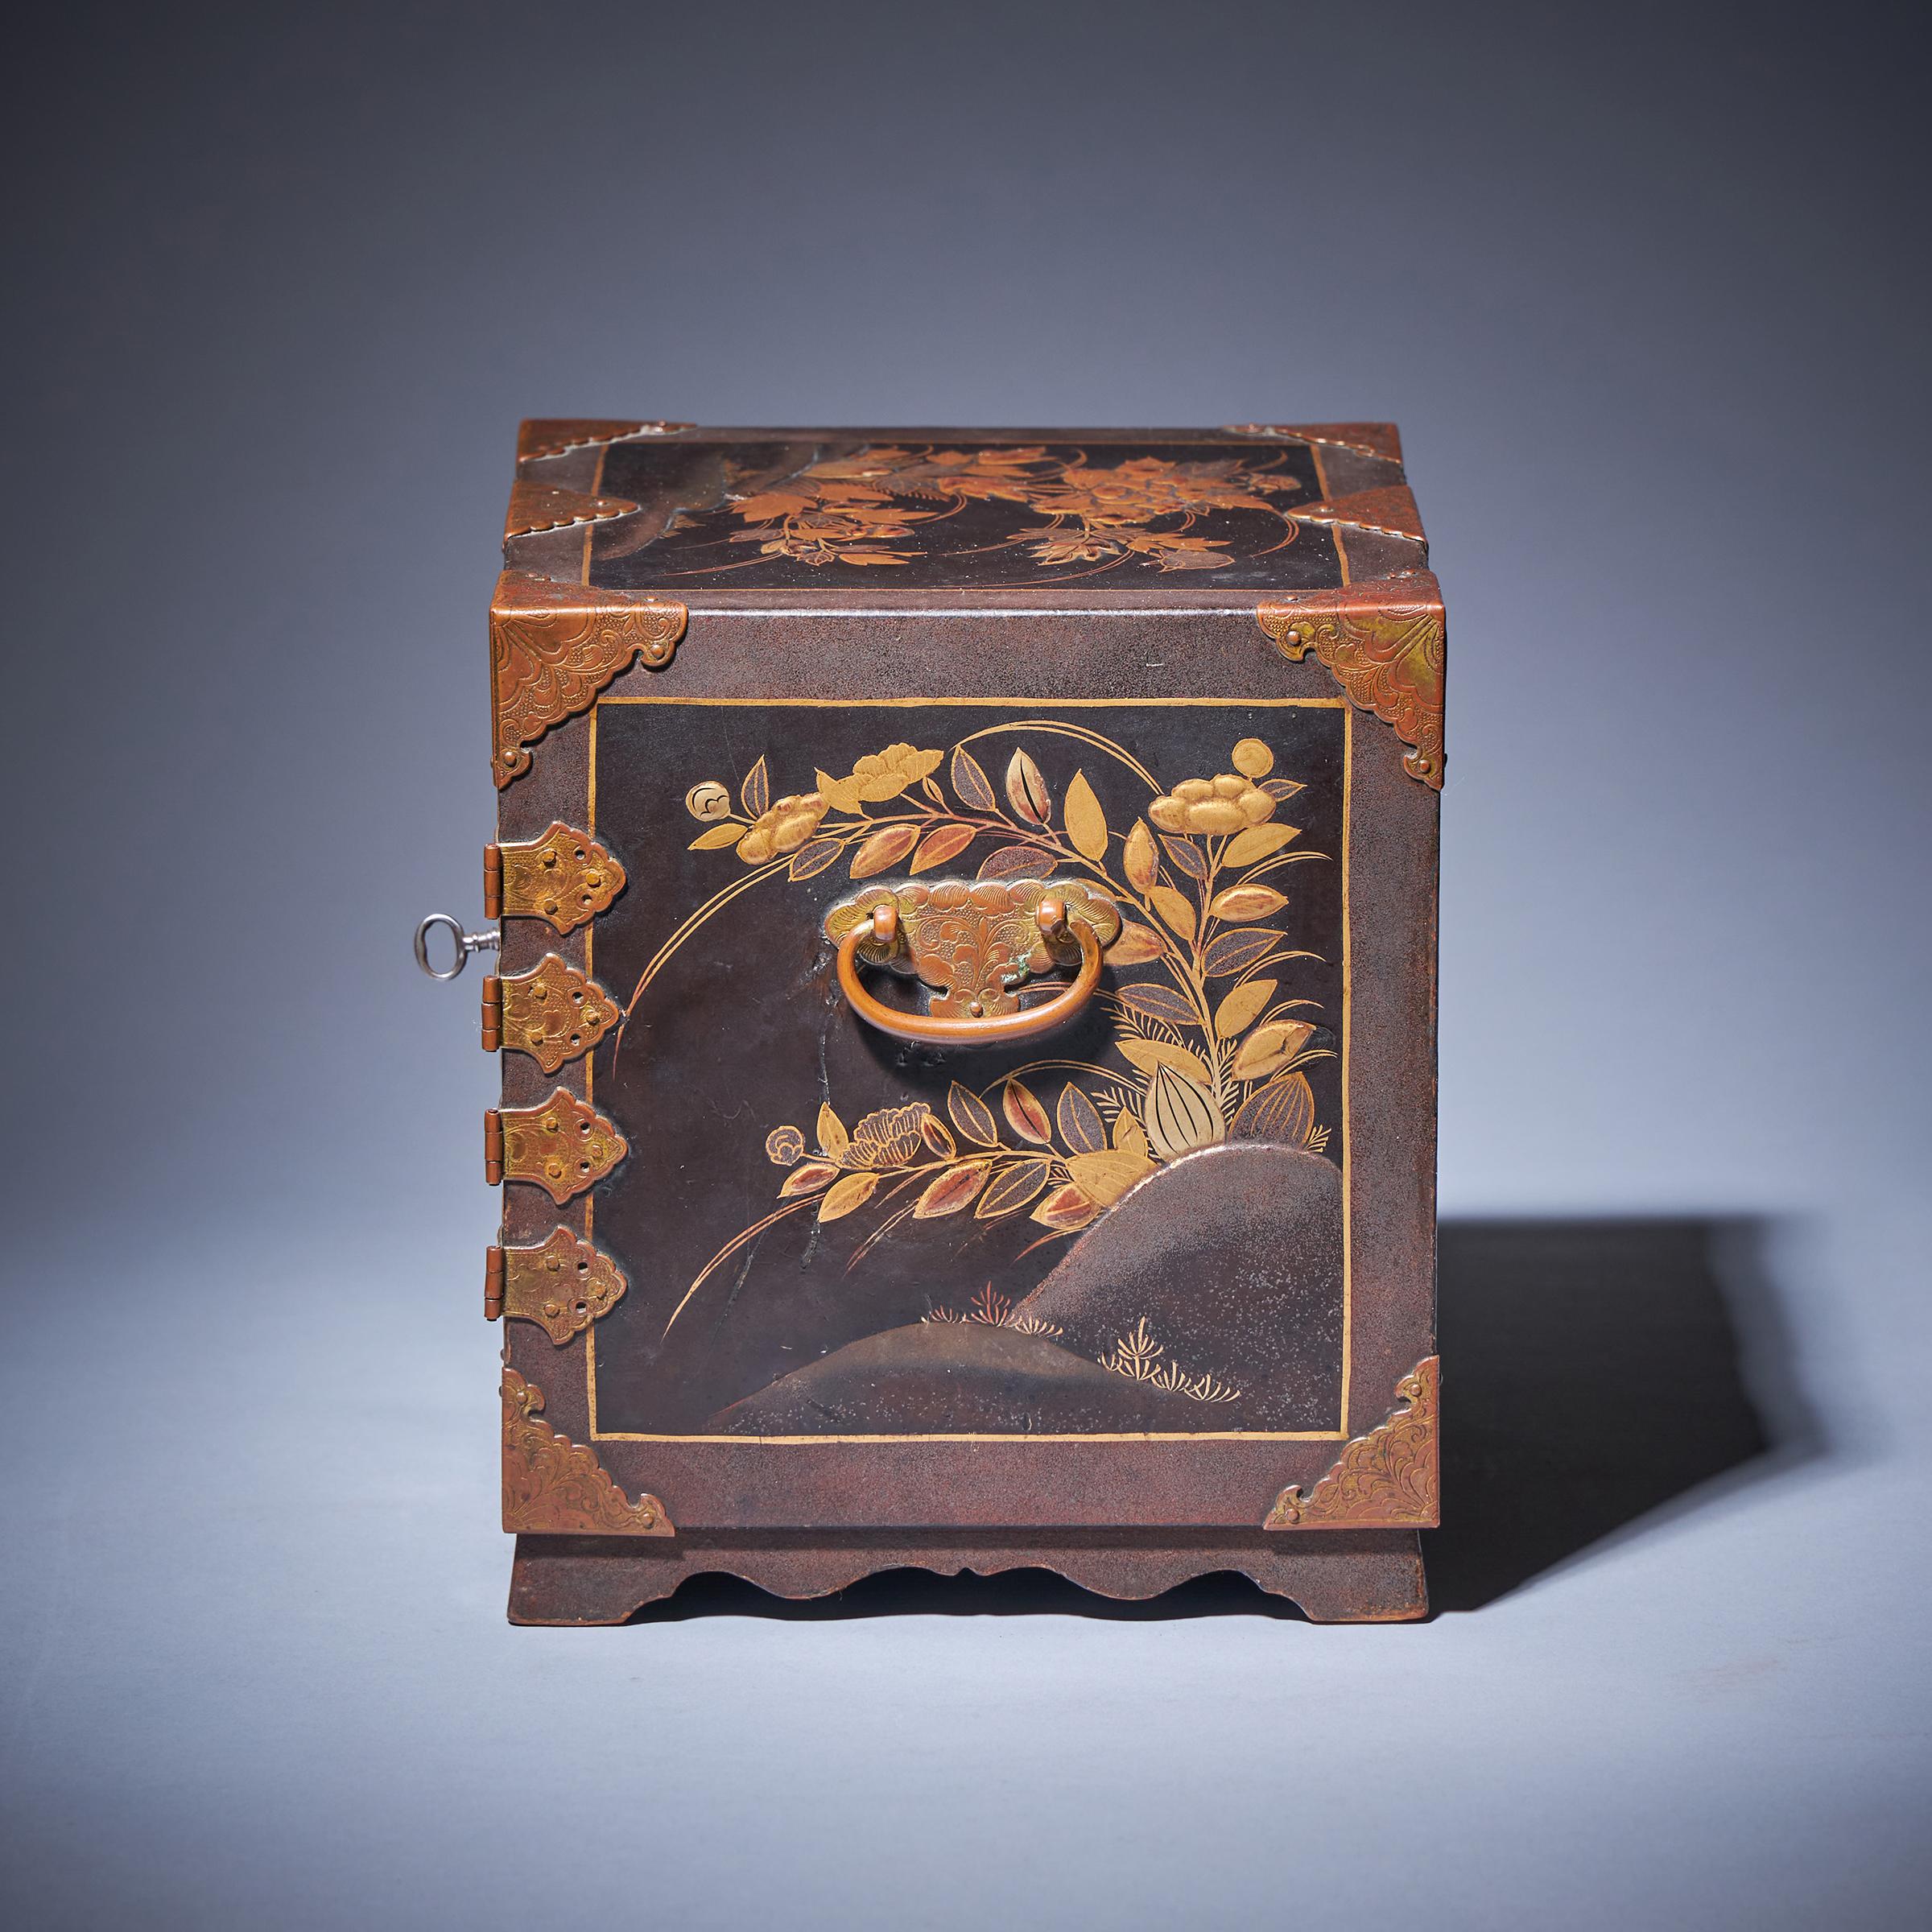 Important Early Edo Period 17th Century Miniature Japanese Lacquer Cabinet In Excellent Condition For Sale In Oxfordshire, United Kingdom